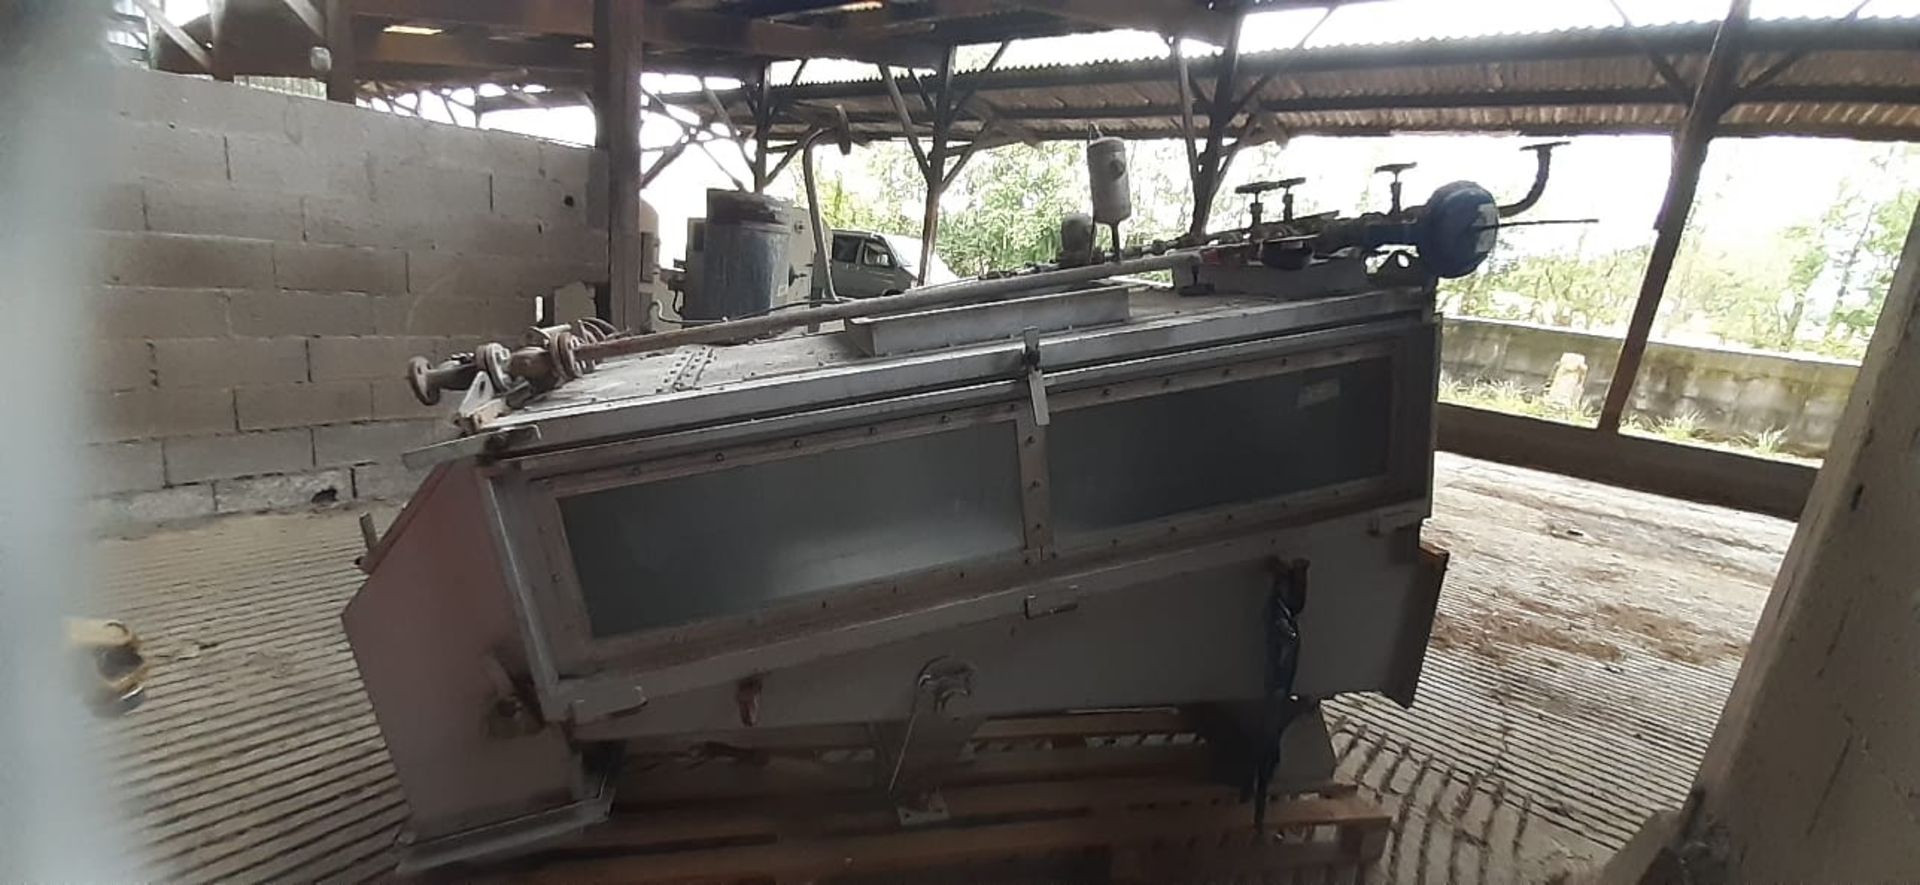 Bed Dryer - Buhler OTW 150 fluid bed dryer/cooler, new 1998 but never used. It can be used to dry or - Bild 5 aus 11